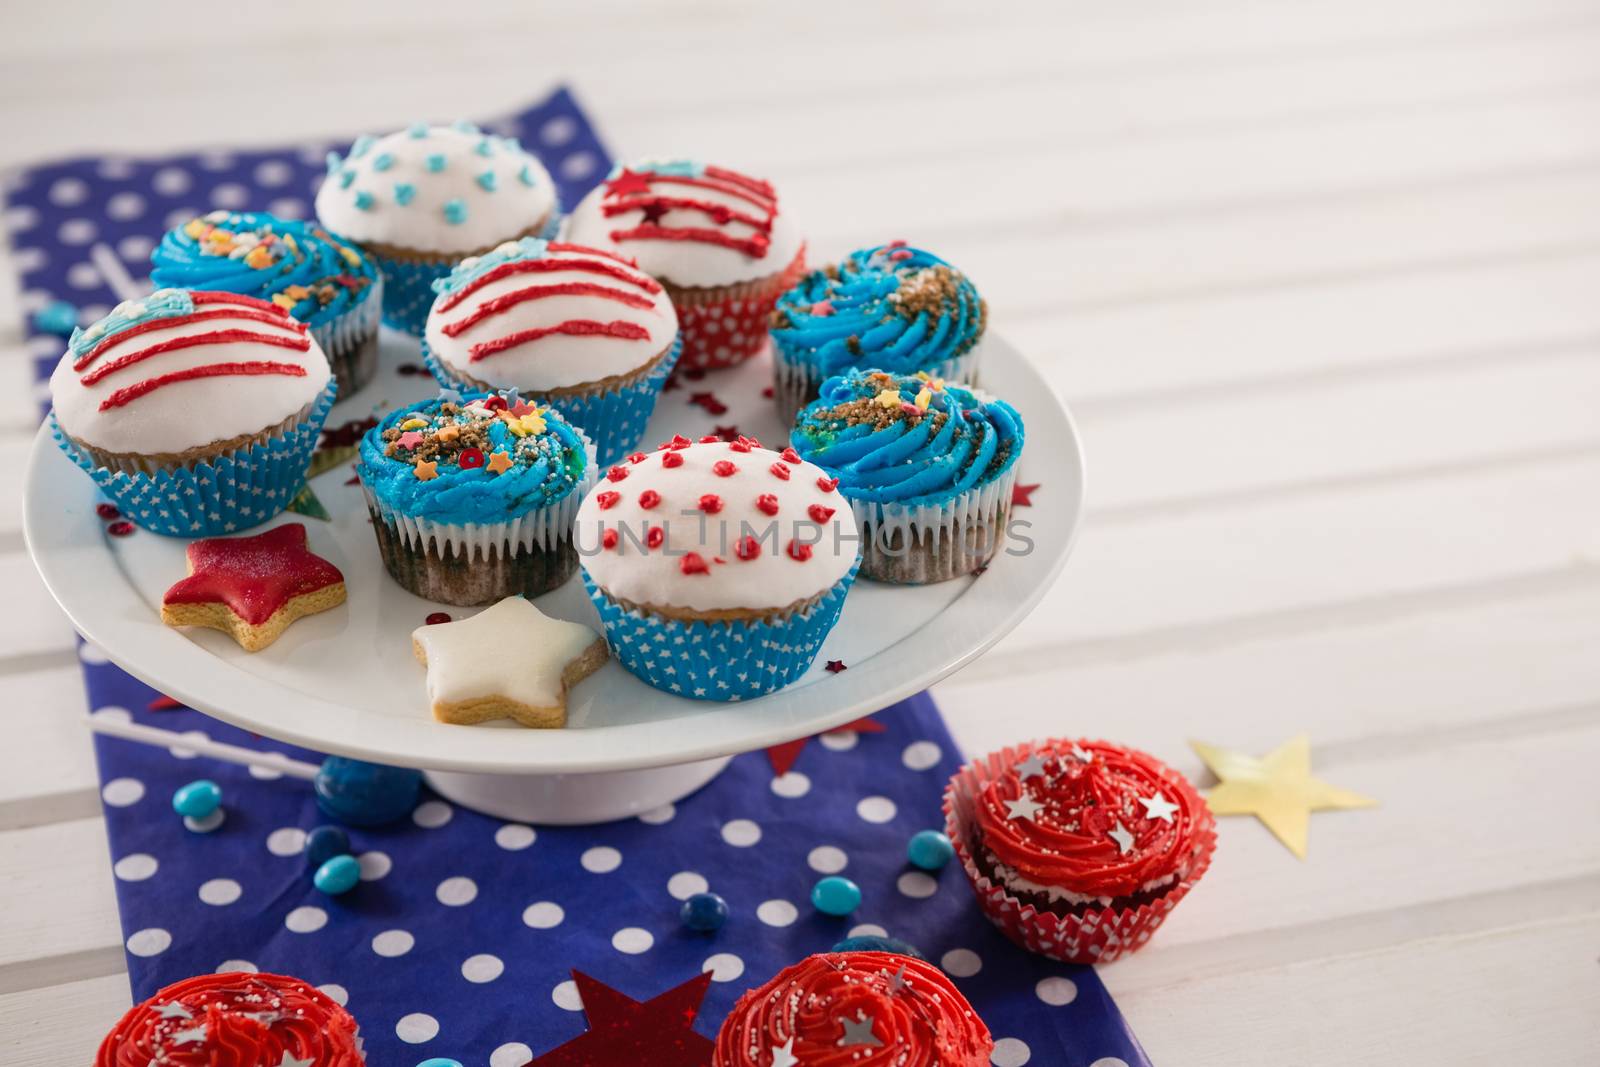 Decorated cupcakes with 4th july theme arranged on plate